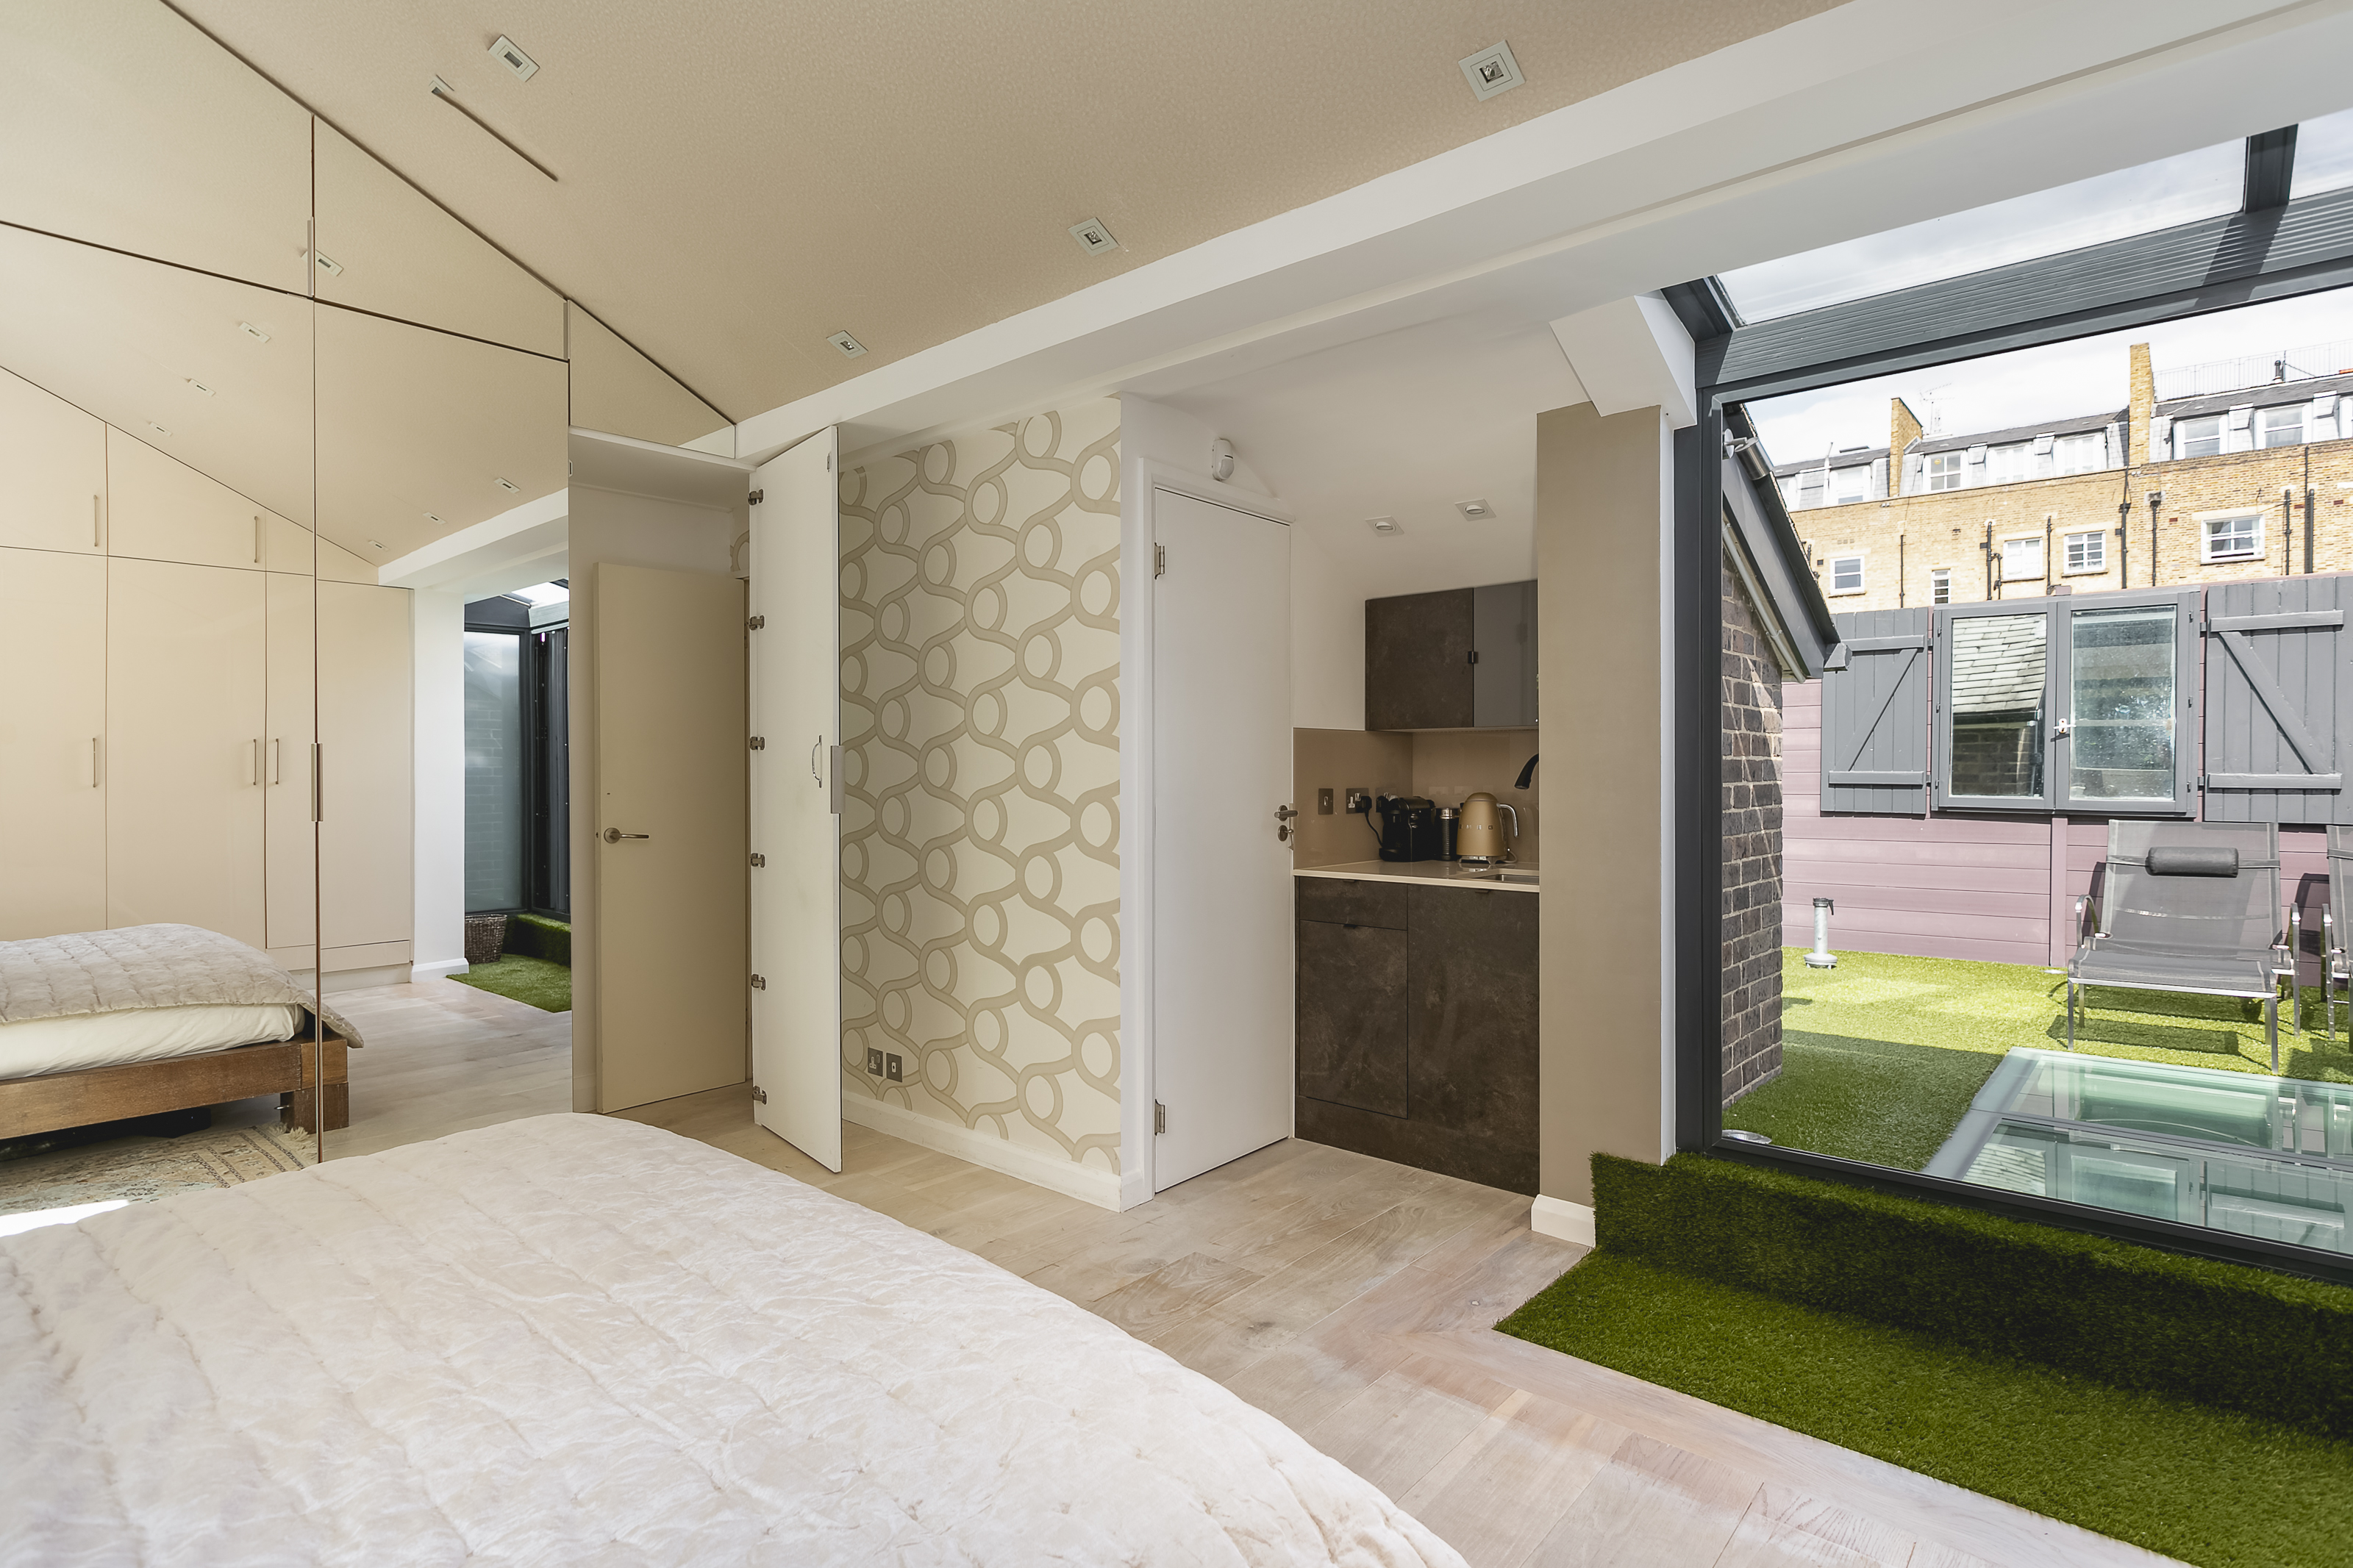 <p>Lovelydays Luxury Rentals introduce you pictures of a charming house in the heart of Kensington</p>